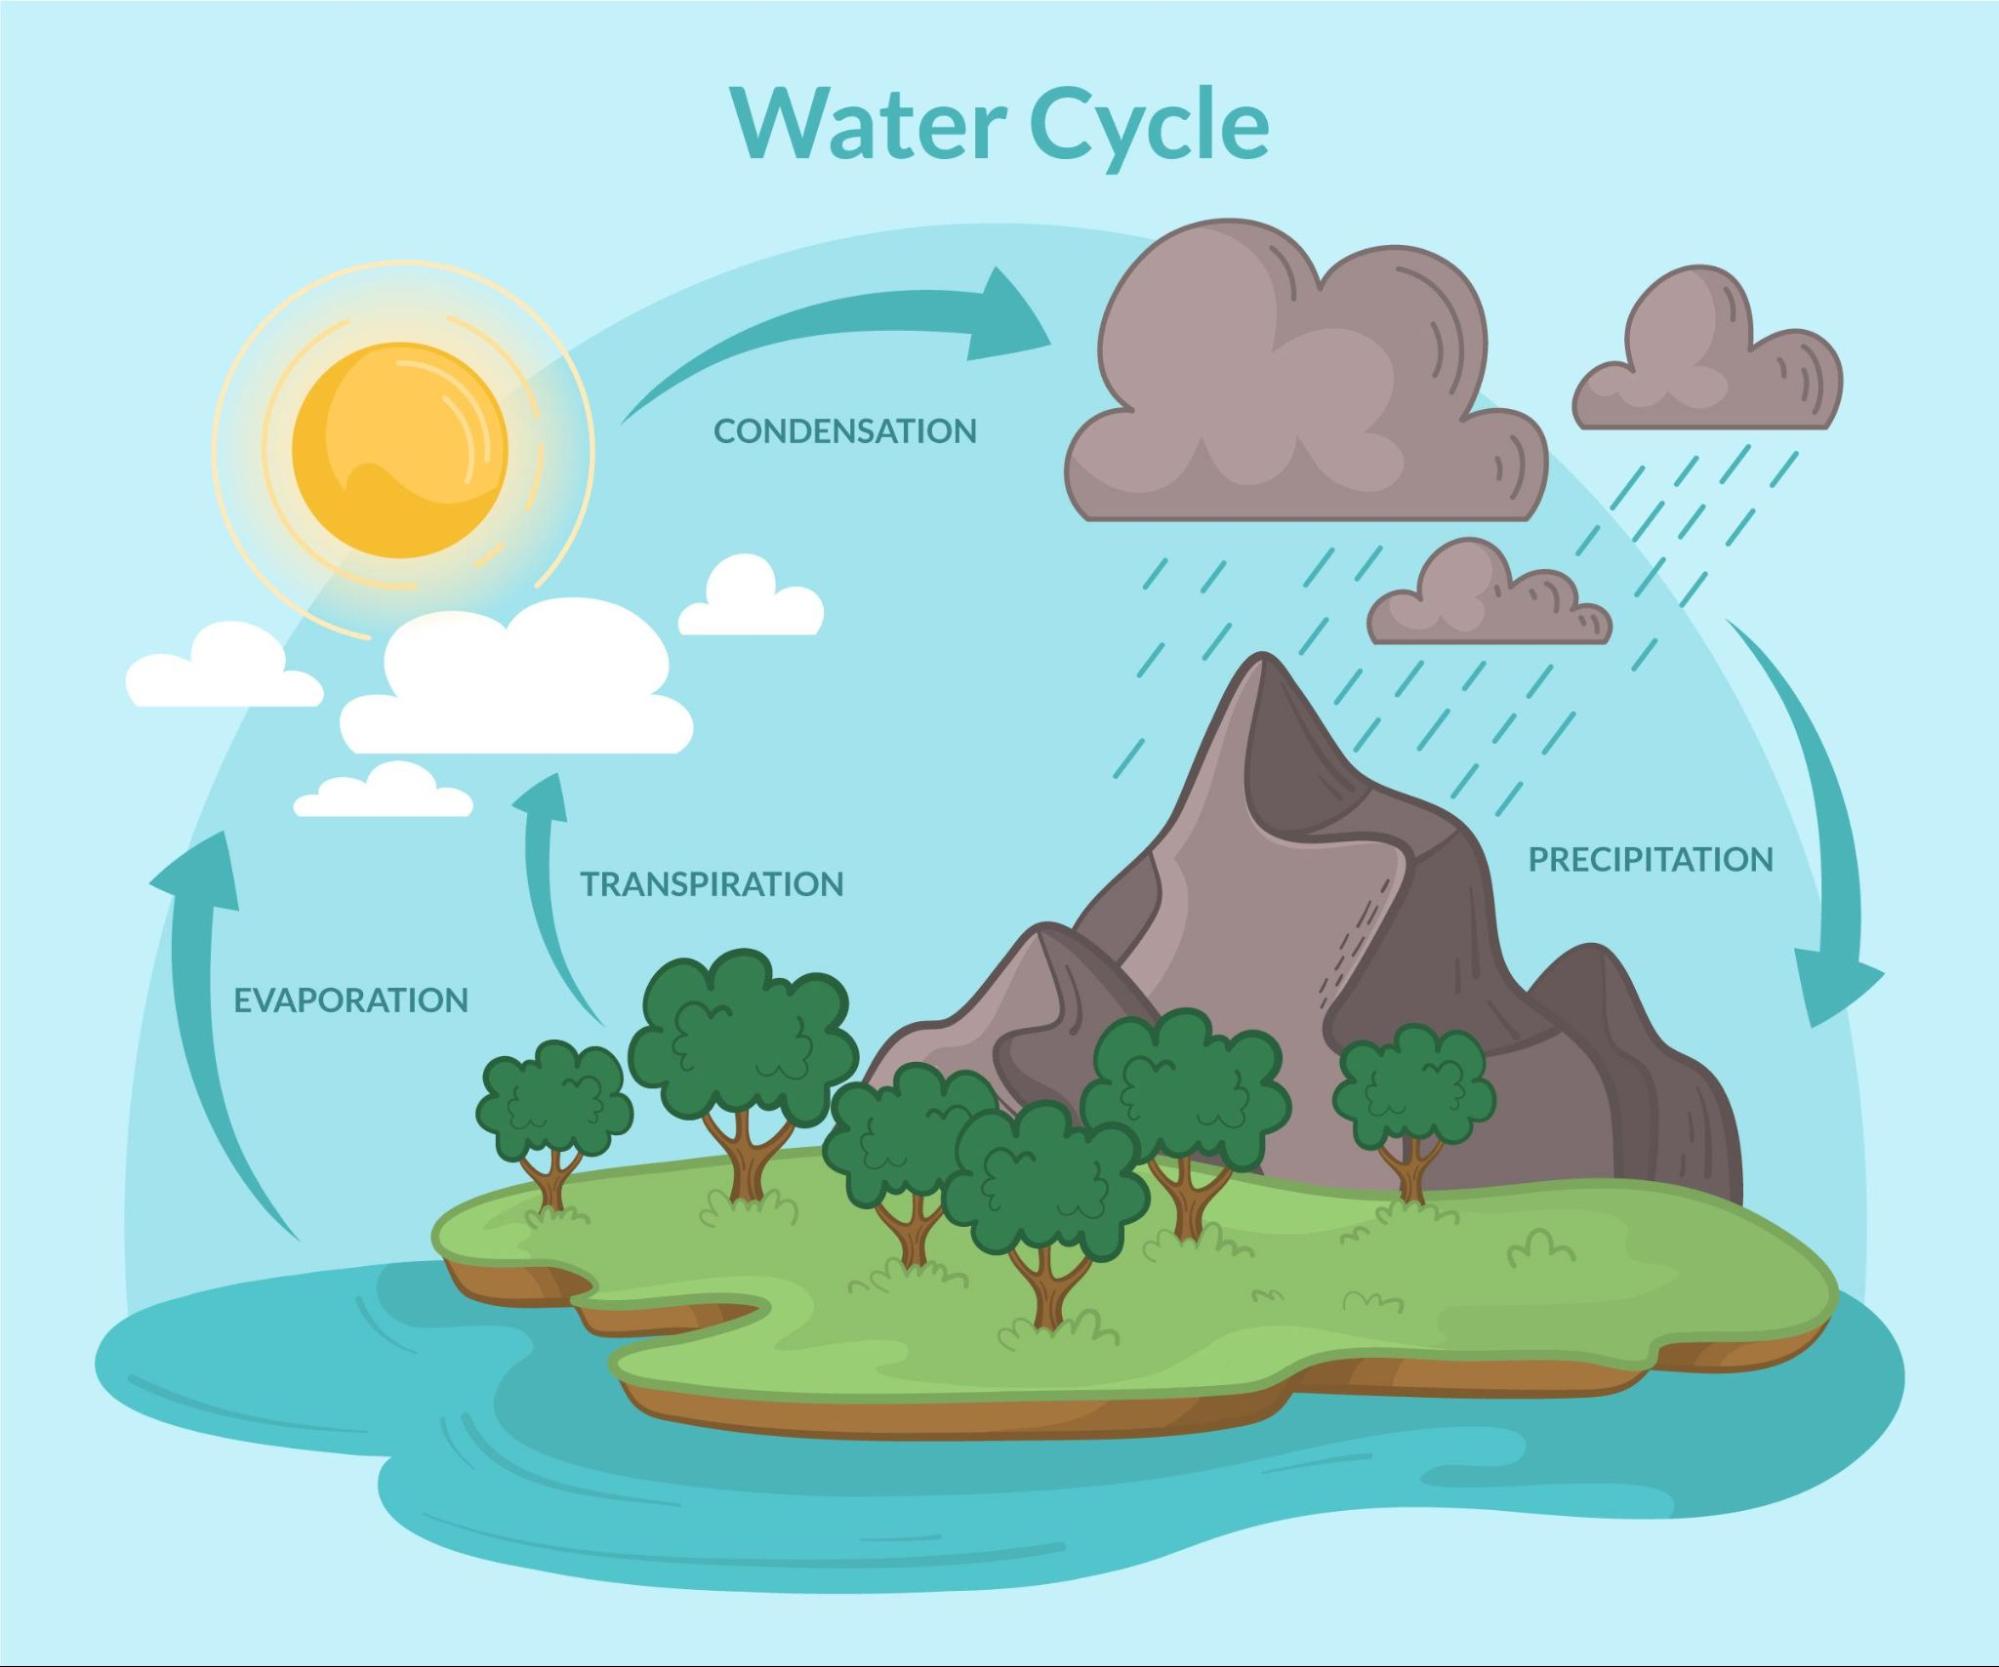 A picture showing the water cycle